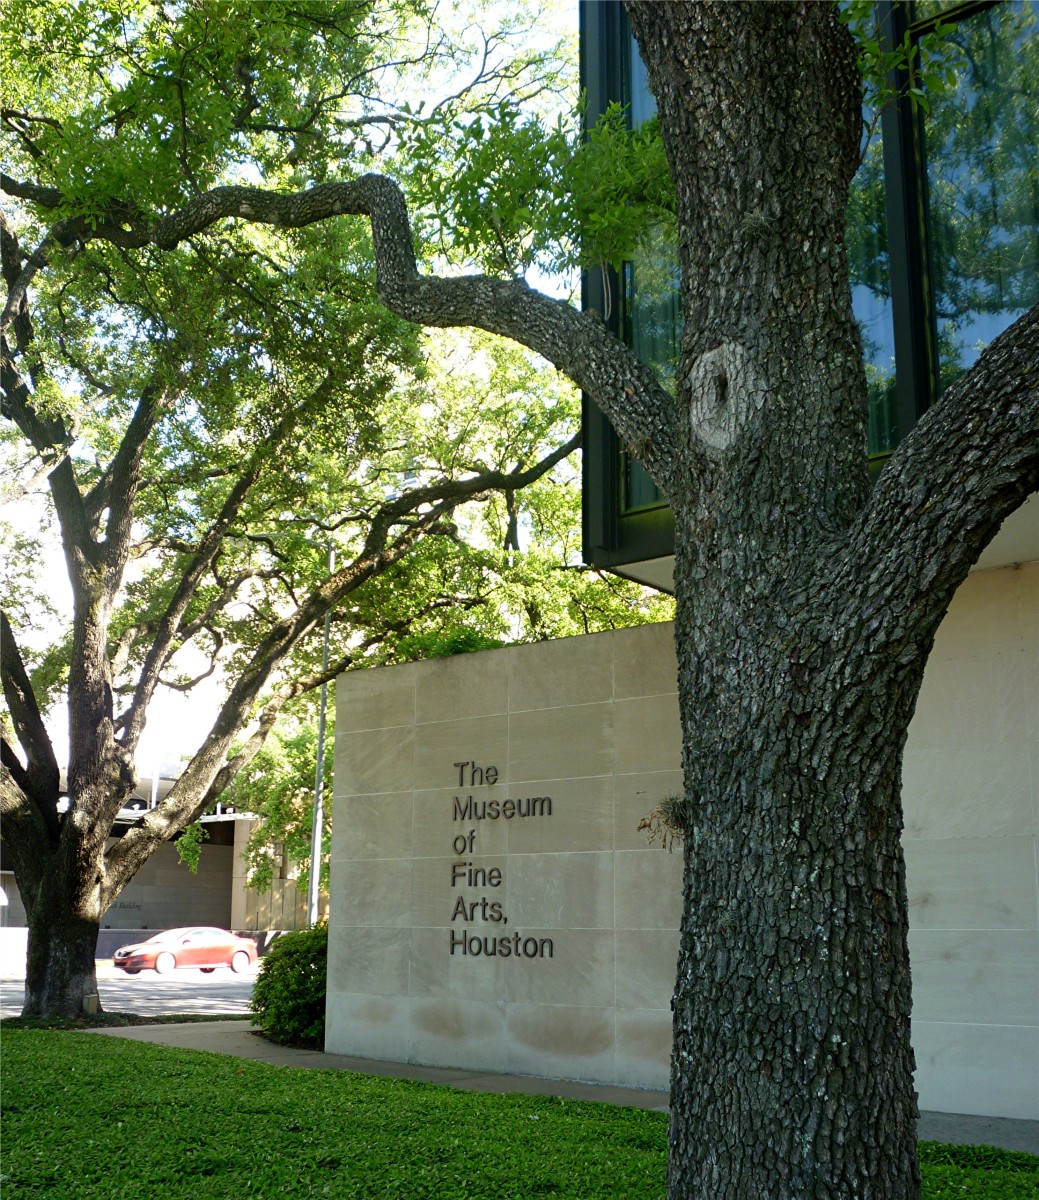 External view of a portion of the Museum of Fine Arts Houston